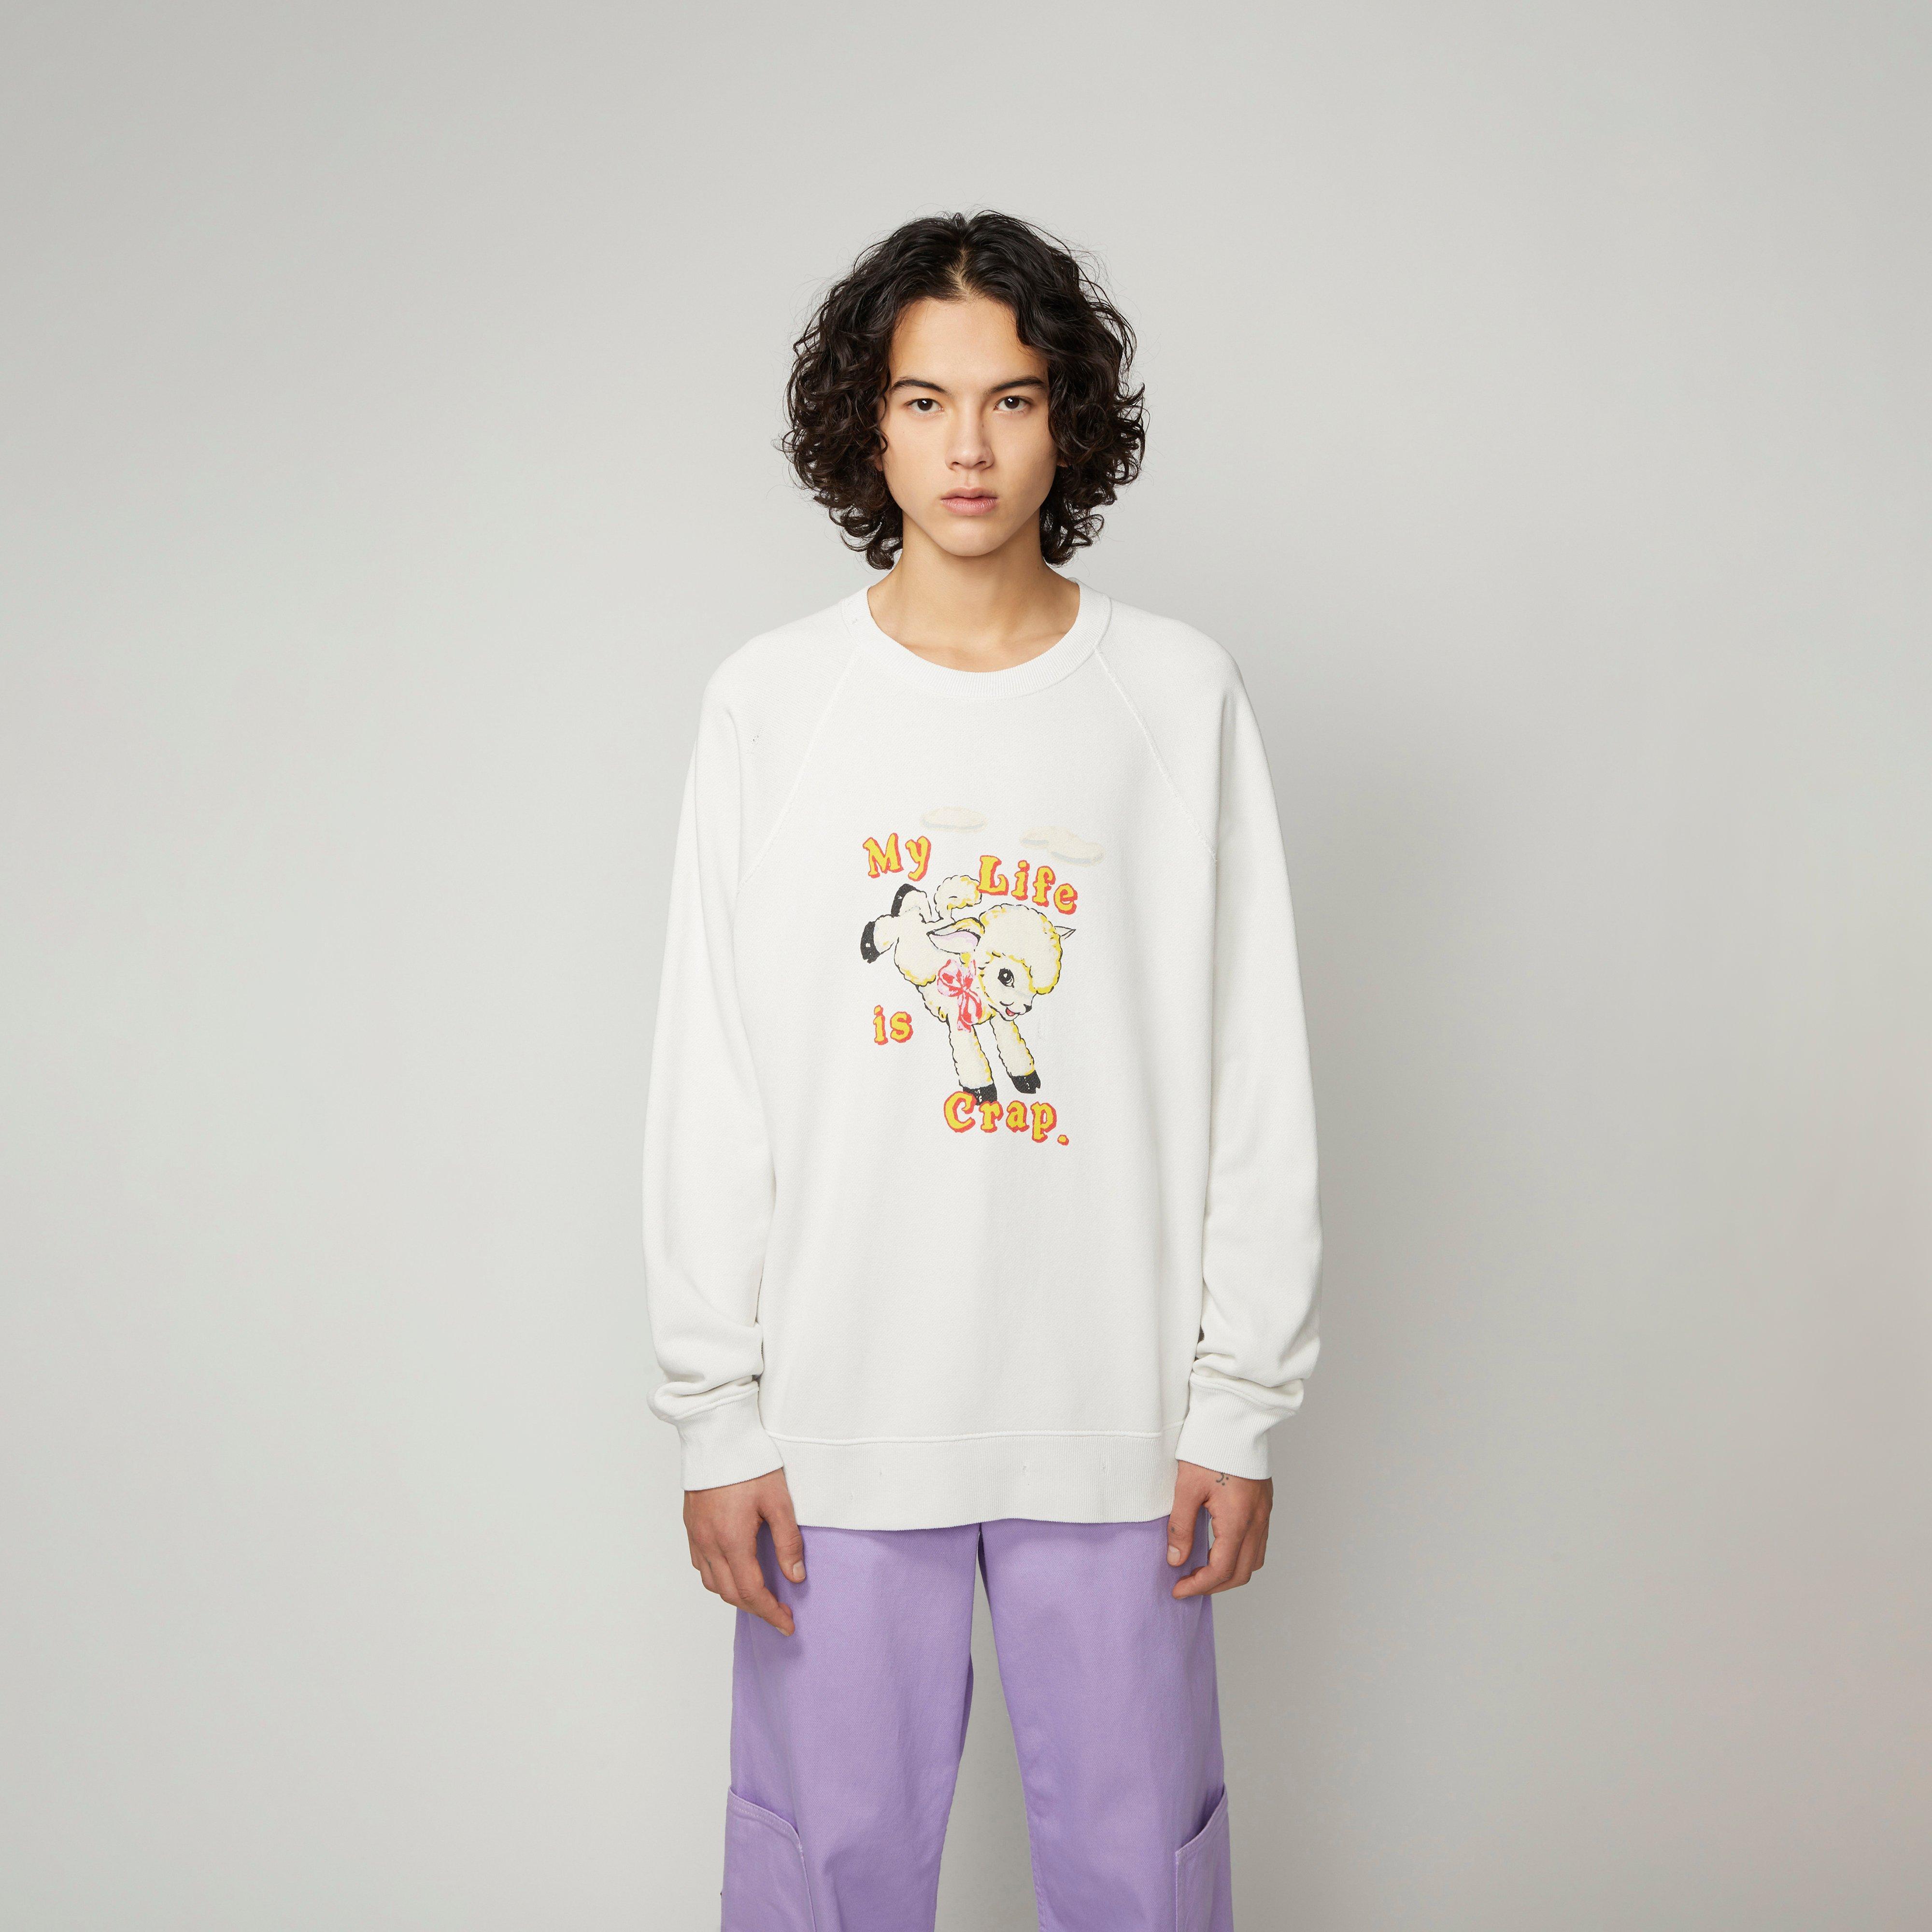 Marc Jacobs Cotton Magda Archer Collaboration Sweatshirt in Vintage White  (White) - Save 40% - Lyst